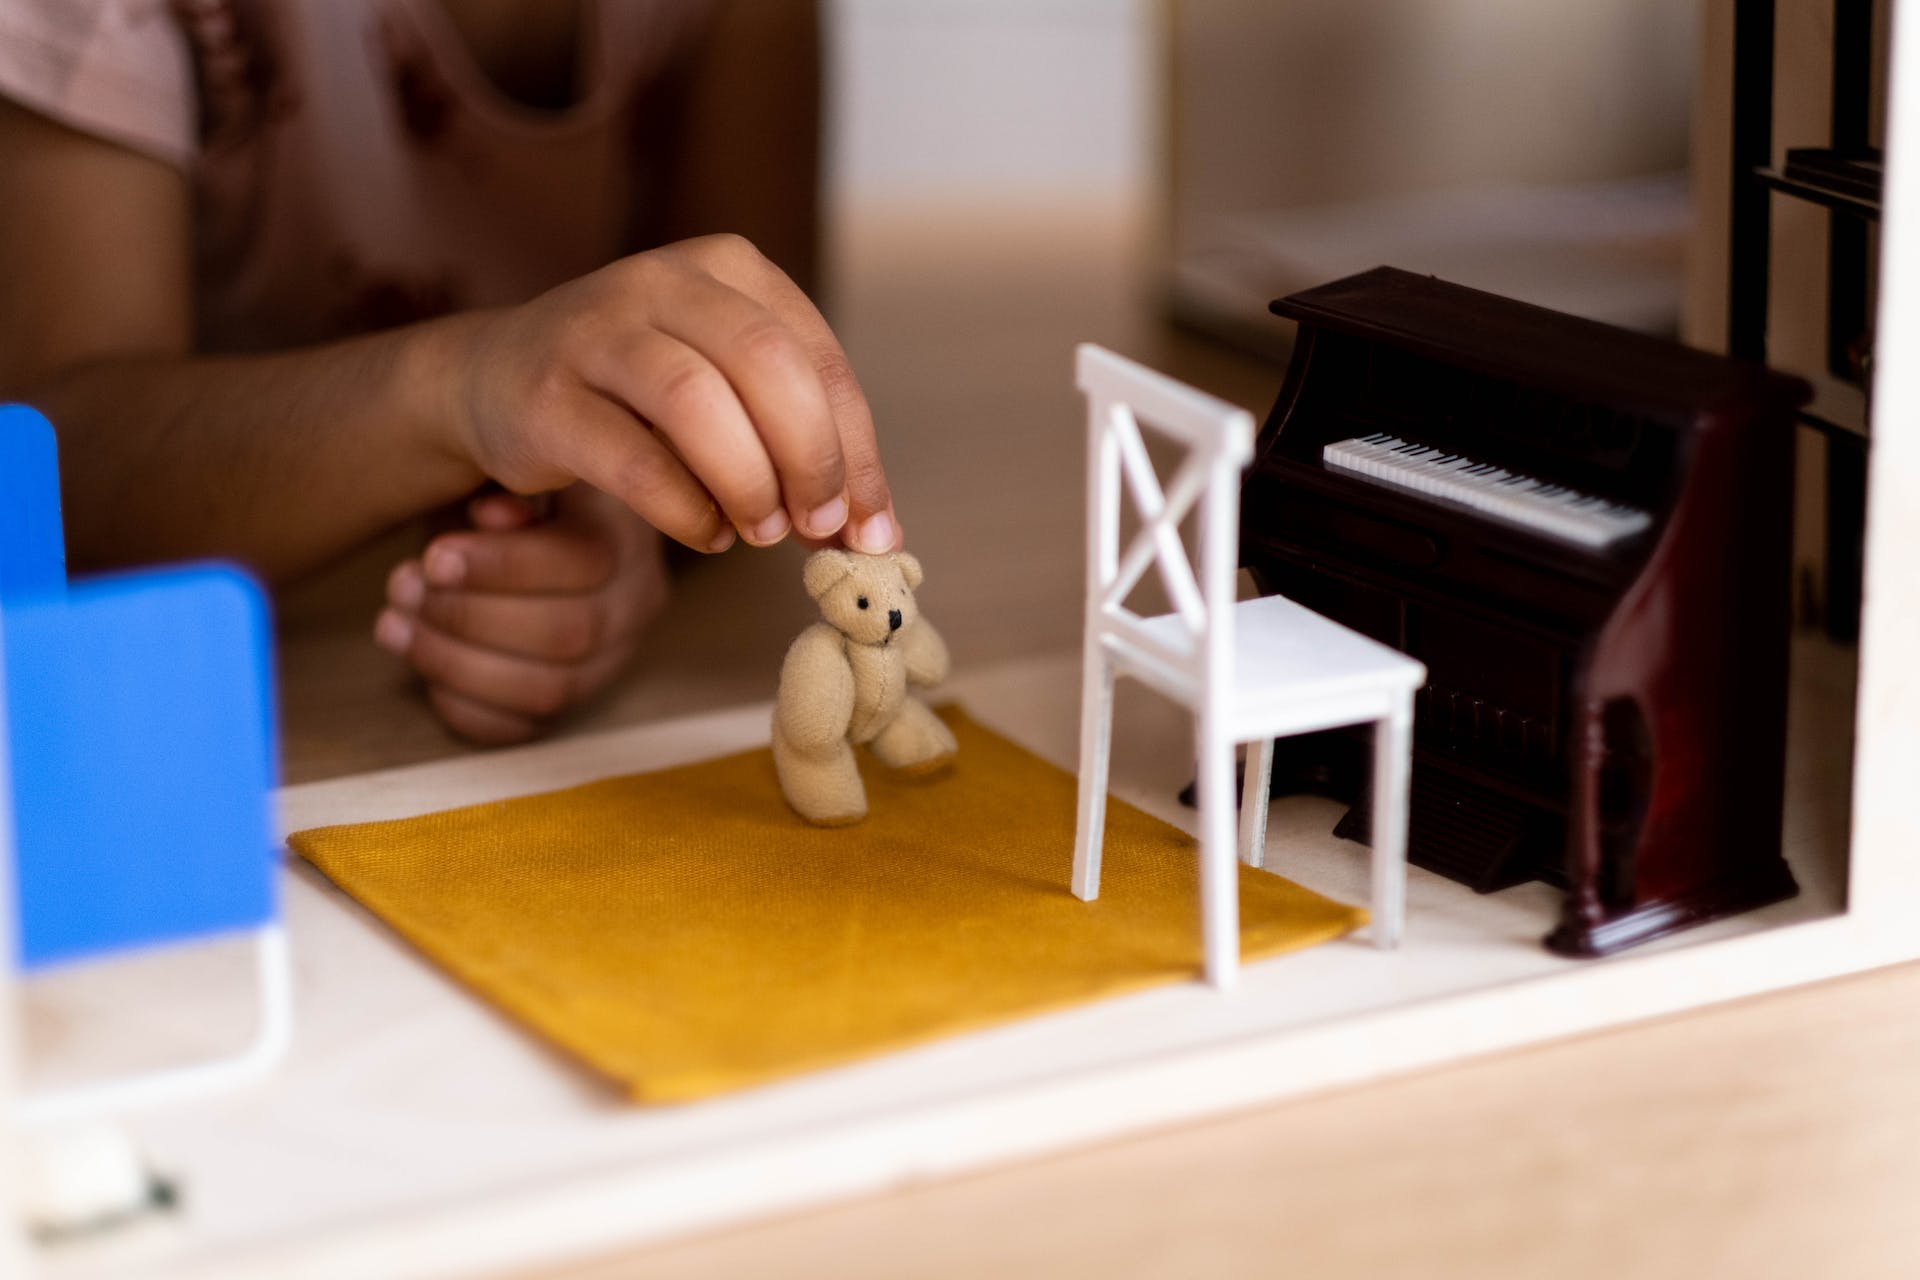 Child playing with dollhouse | Source: Pexels